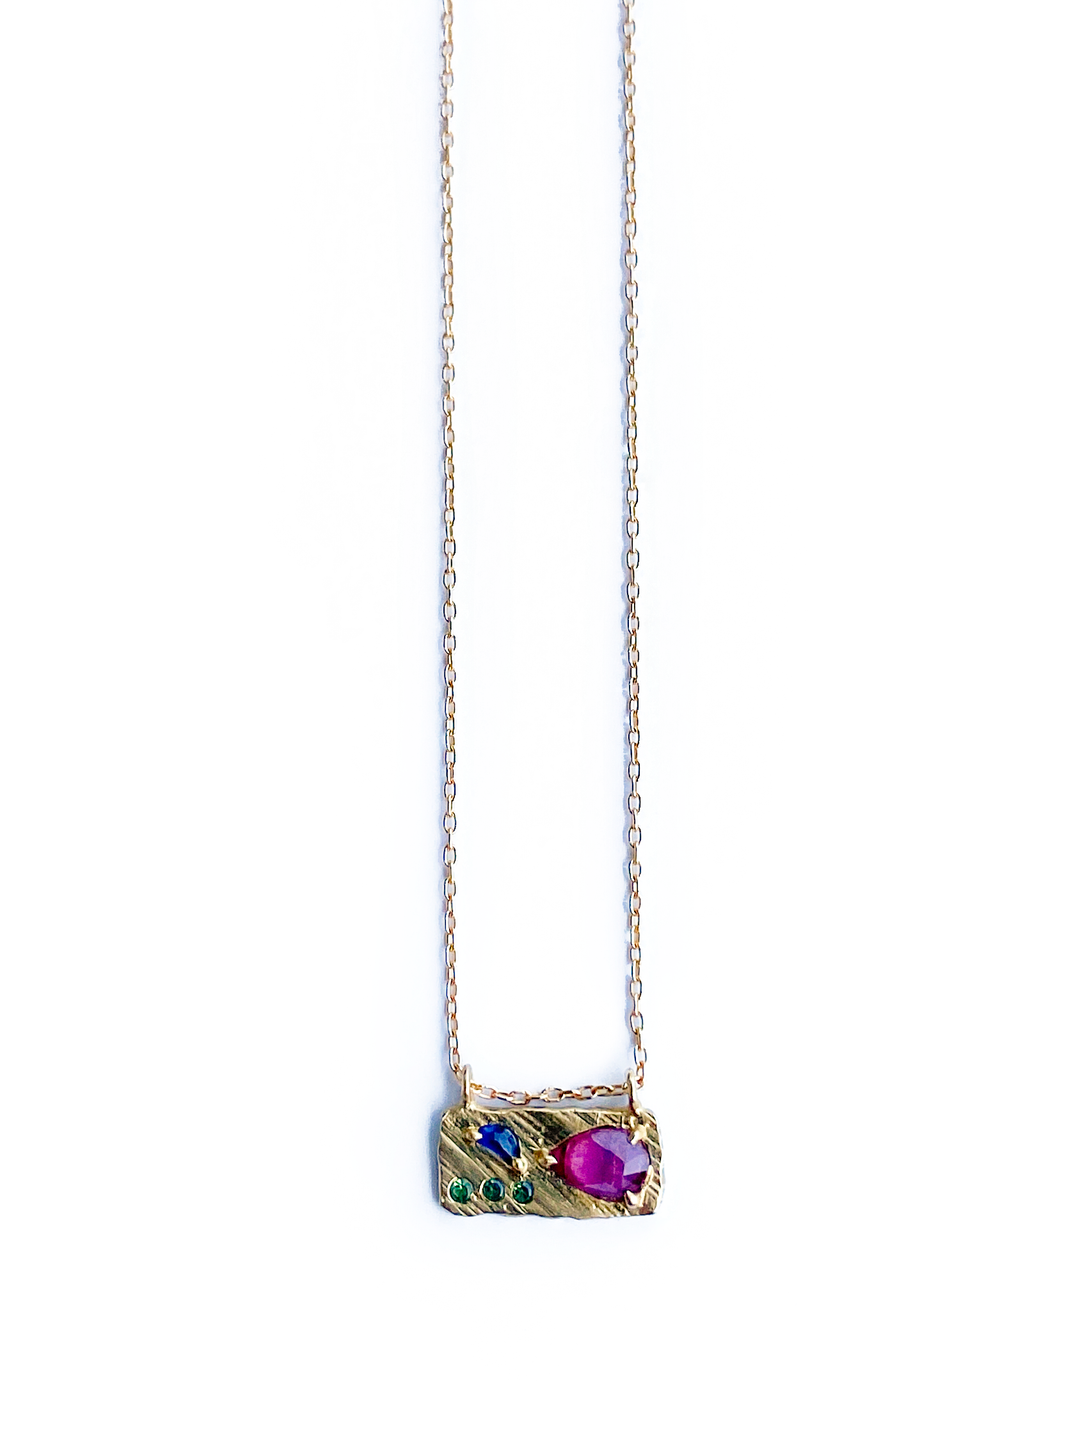 Lio & Linn Designs - 14K Small Collage Necklace in Ruby, Green Tourmaline & Blue Sapphire